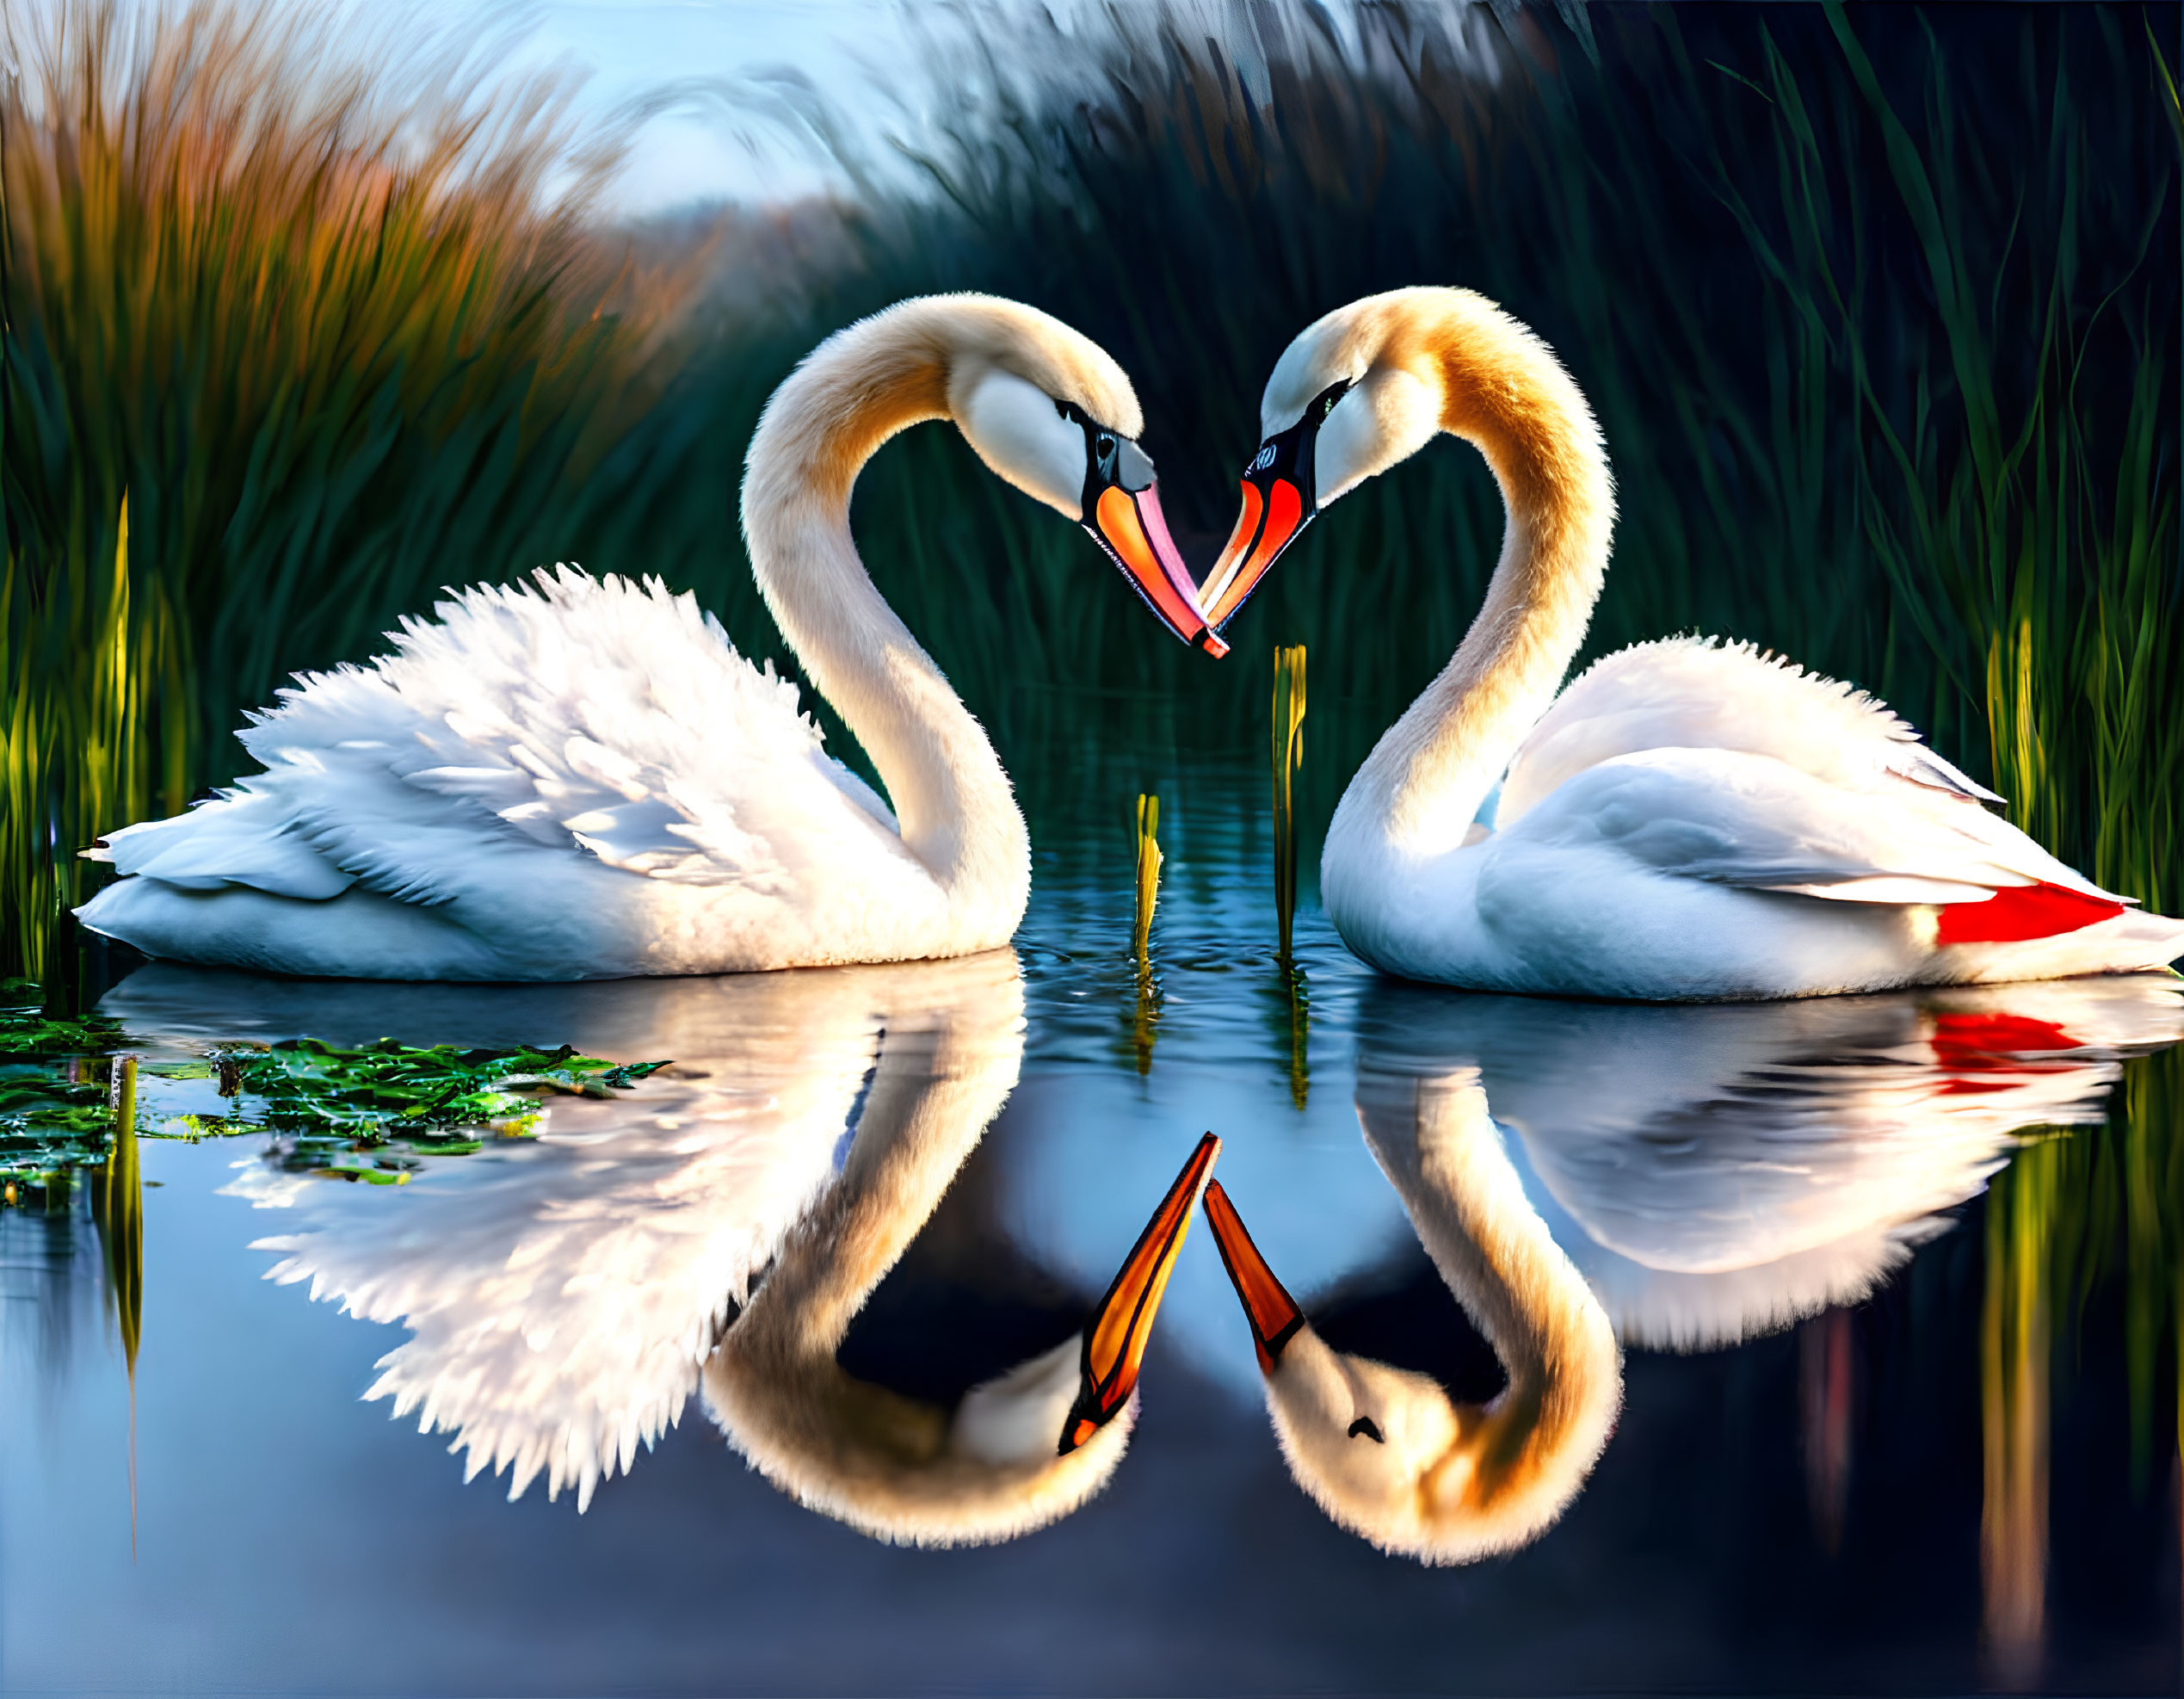 Swans Creating Heart Shape Reflection on Tranquil Water at Dusk